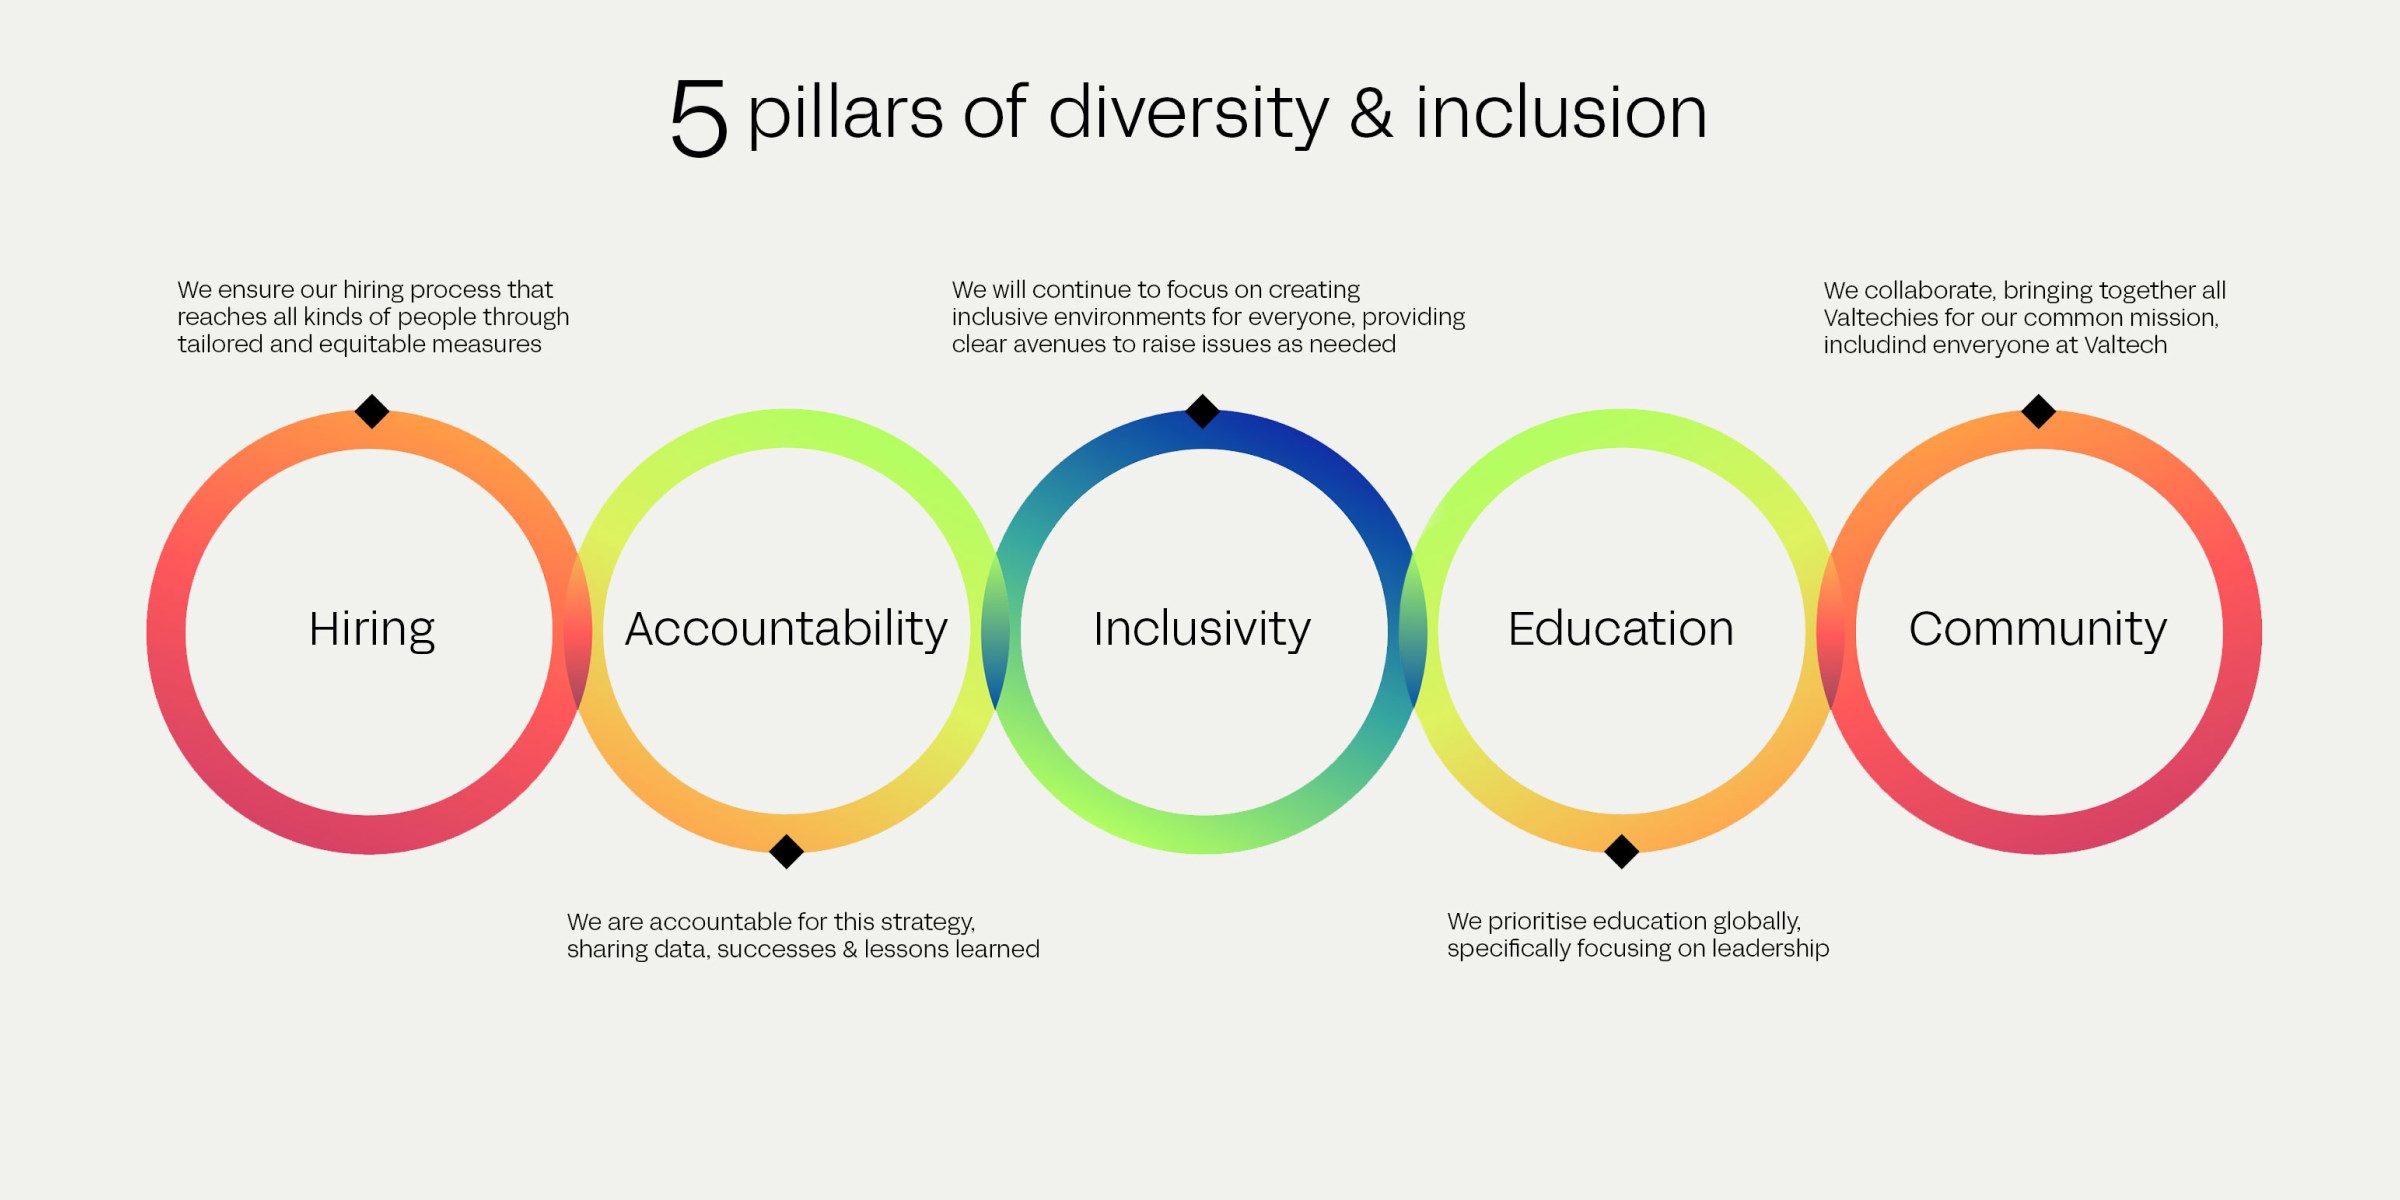 A circular diagram with 5 sections. First section: Blue, Education - We prioritise education globally, specifically focusing on leadership. Second section: Green, Community - We collaborate, bringing together all Valtechies for our common mission - including everyone at Valtech, Third section: Teal, Inclusivity - We will continue to focus on creating inclusive environments for everyone, providing clear avenues to raise issues as needed. Fourth section: Yellow, Hiring - We ensure our hiring process that reaches all kinds of people through tailored and equitable measures. Fifth section: Pink, Accountability - We are accountable for this strategy, sharing data, successes and lessons learned. In middle of circle, text : Everyone at Valtech 5 pillars of diversity and inclusion